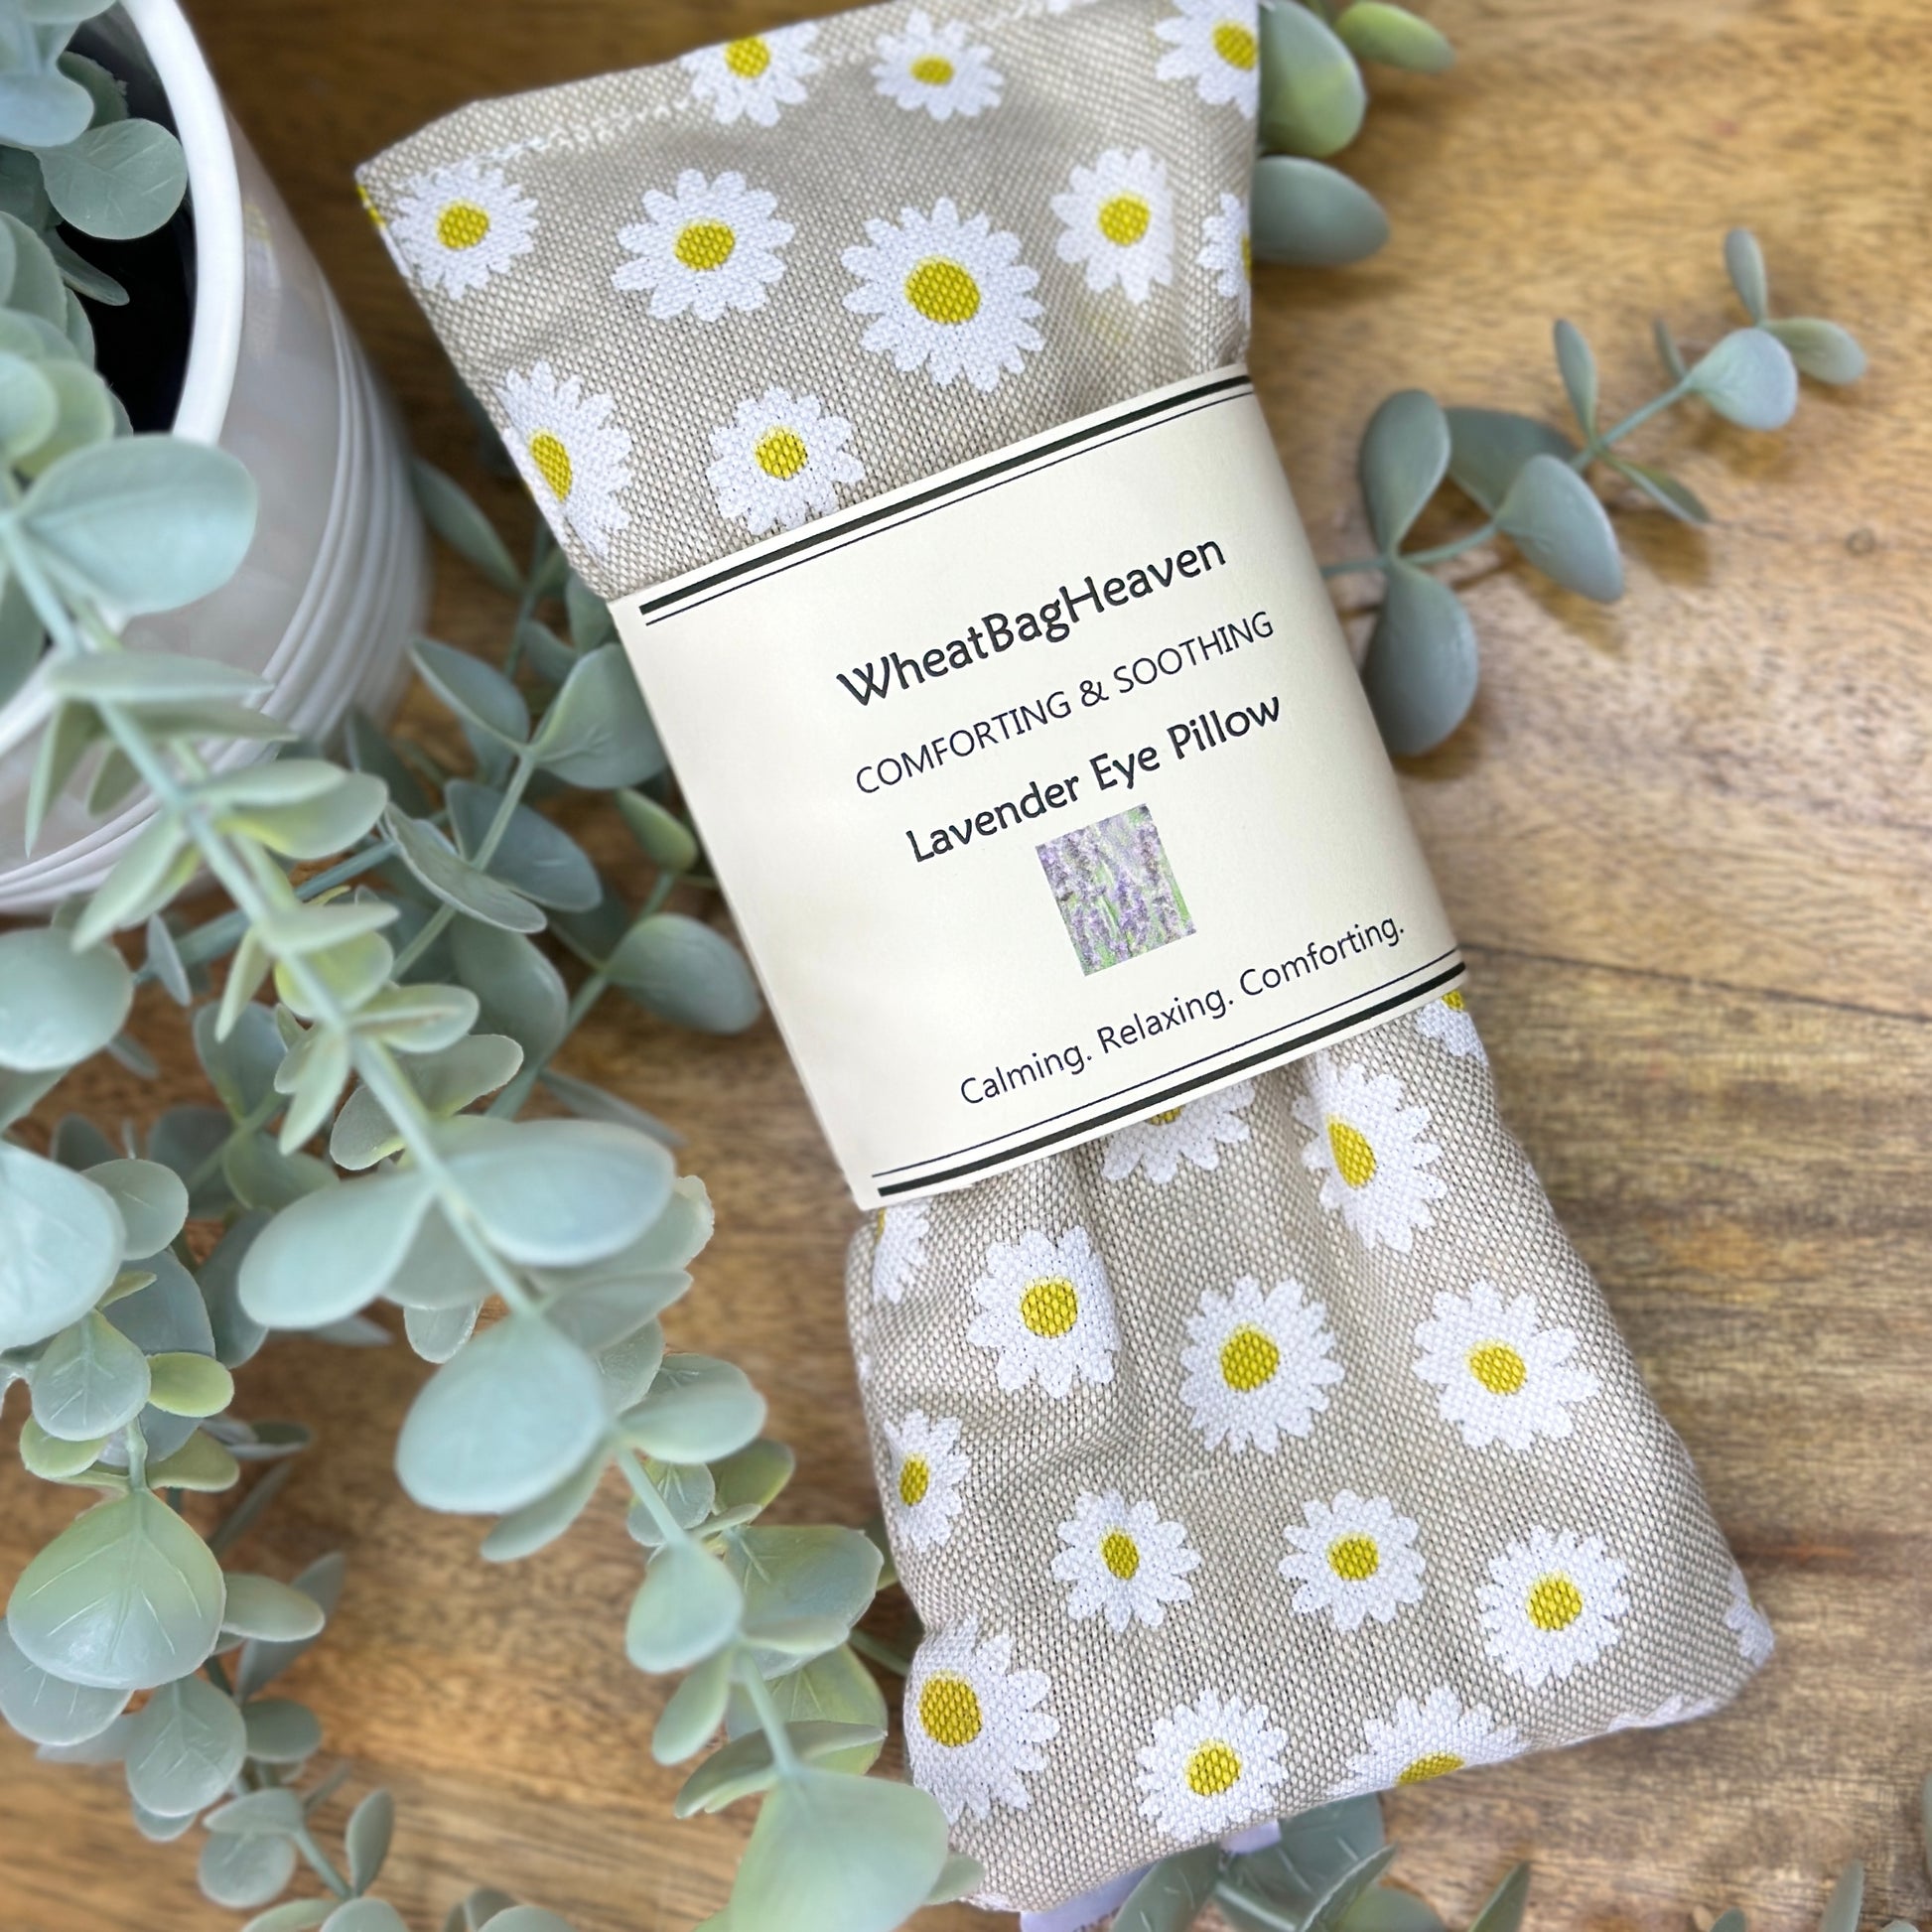 lovely daisy cotton print eye pillow for dry irritated eye relief. Handmade by WheatBagHeaven and ready to despatch with free UK shipping 